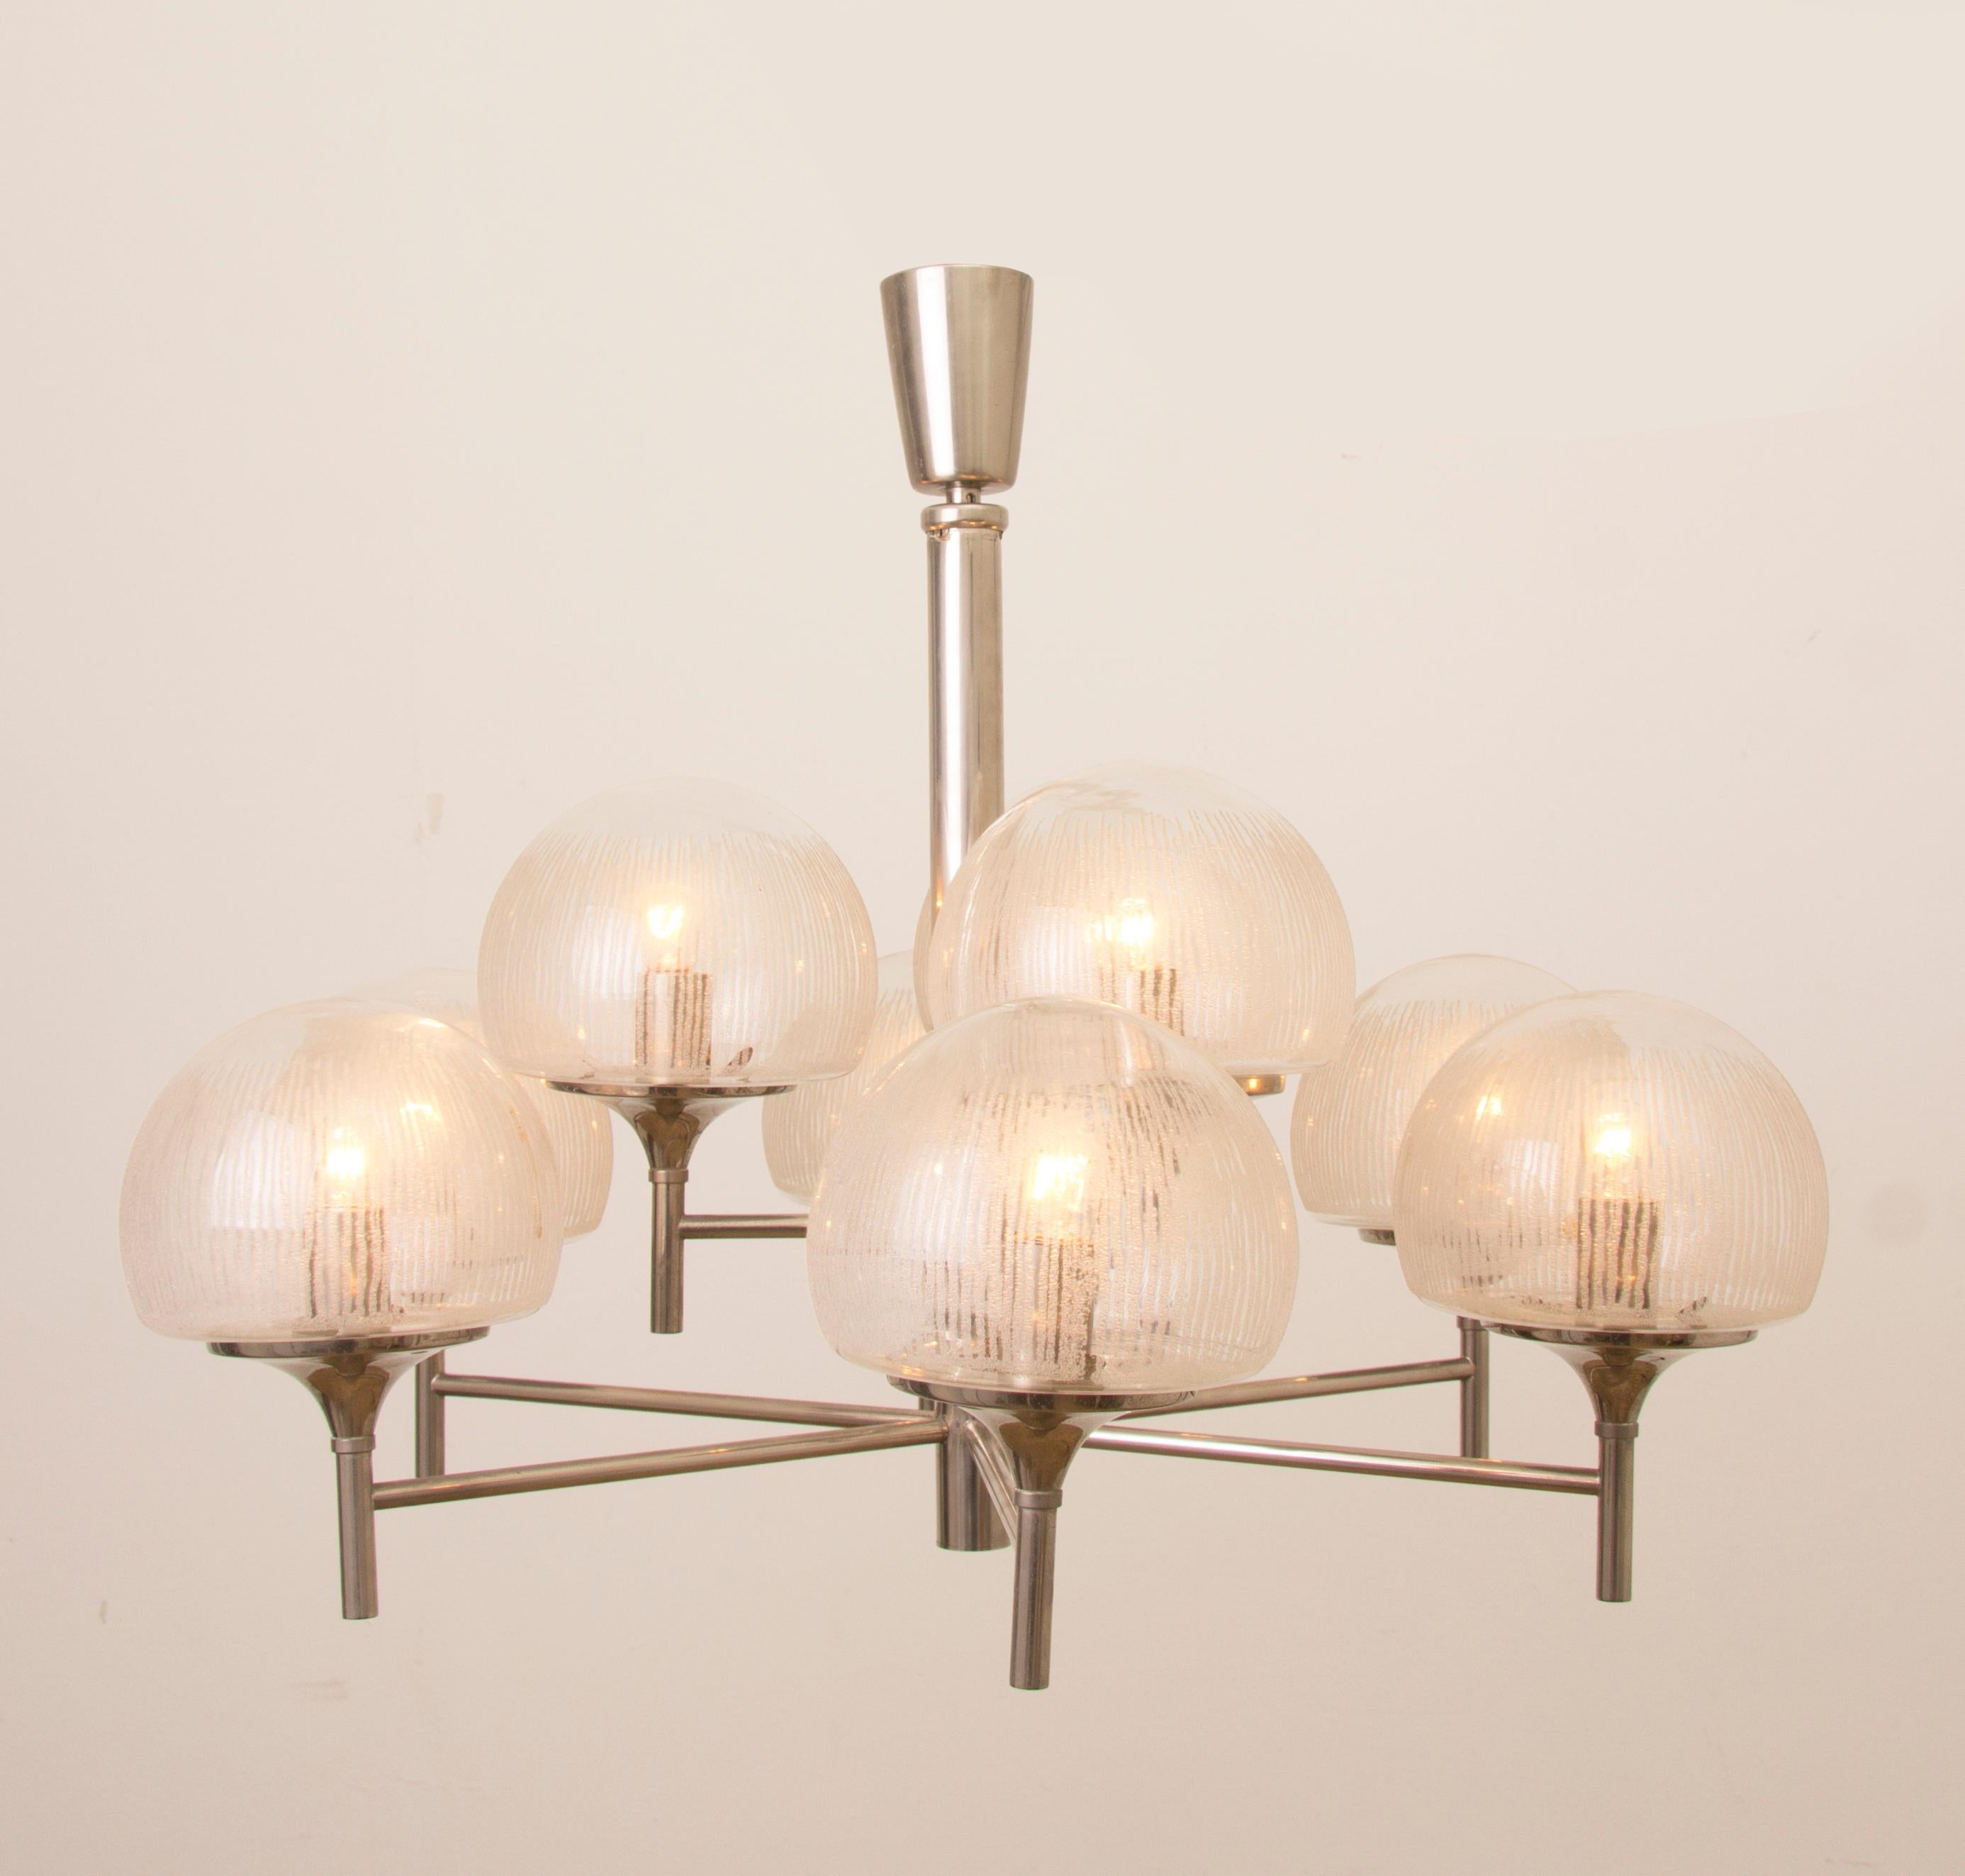 1970s large German Kaiser Leuchten chrome and 9 globe pendant light. The two-tiered light comprises of 6 frosted semi-hemispheric glass globes around the lower tier and three above suspended from polished chrome arms. The globes are held in place